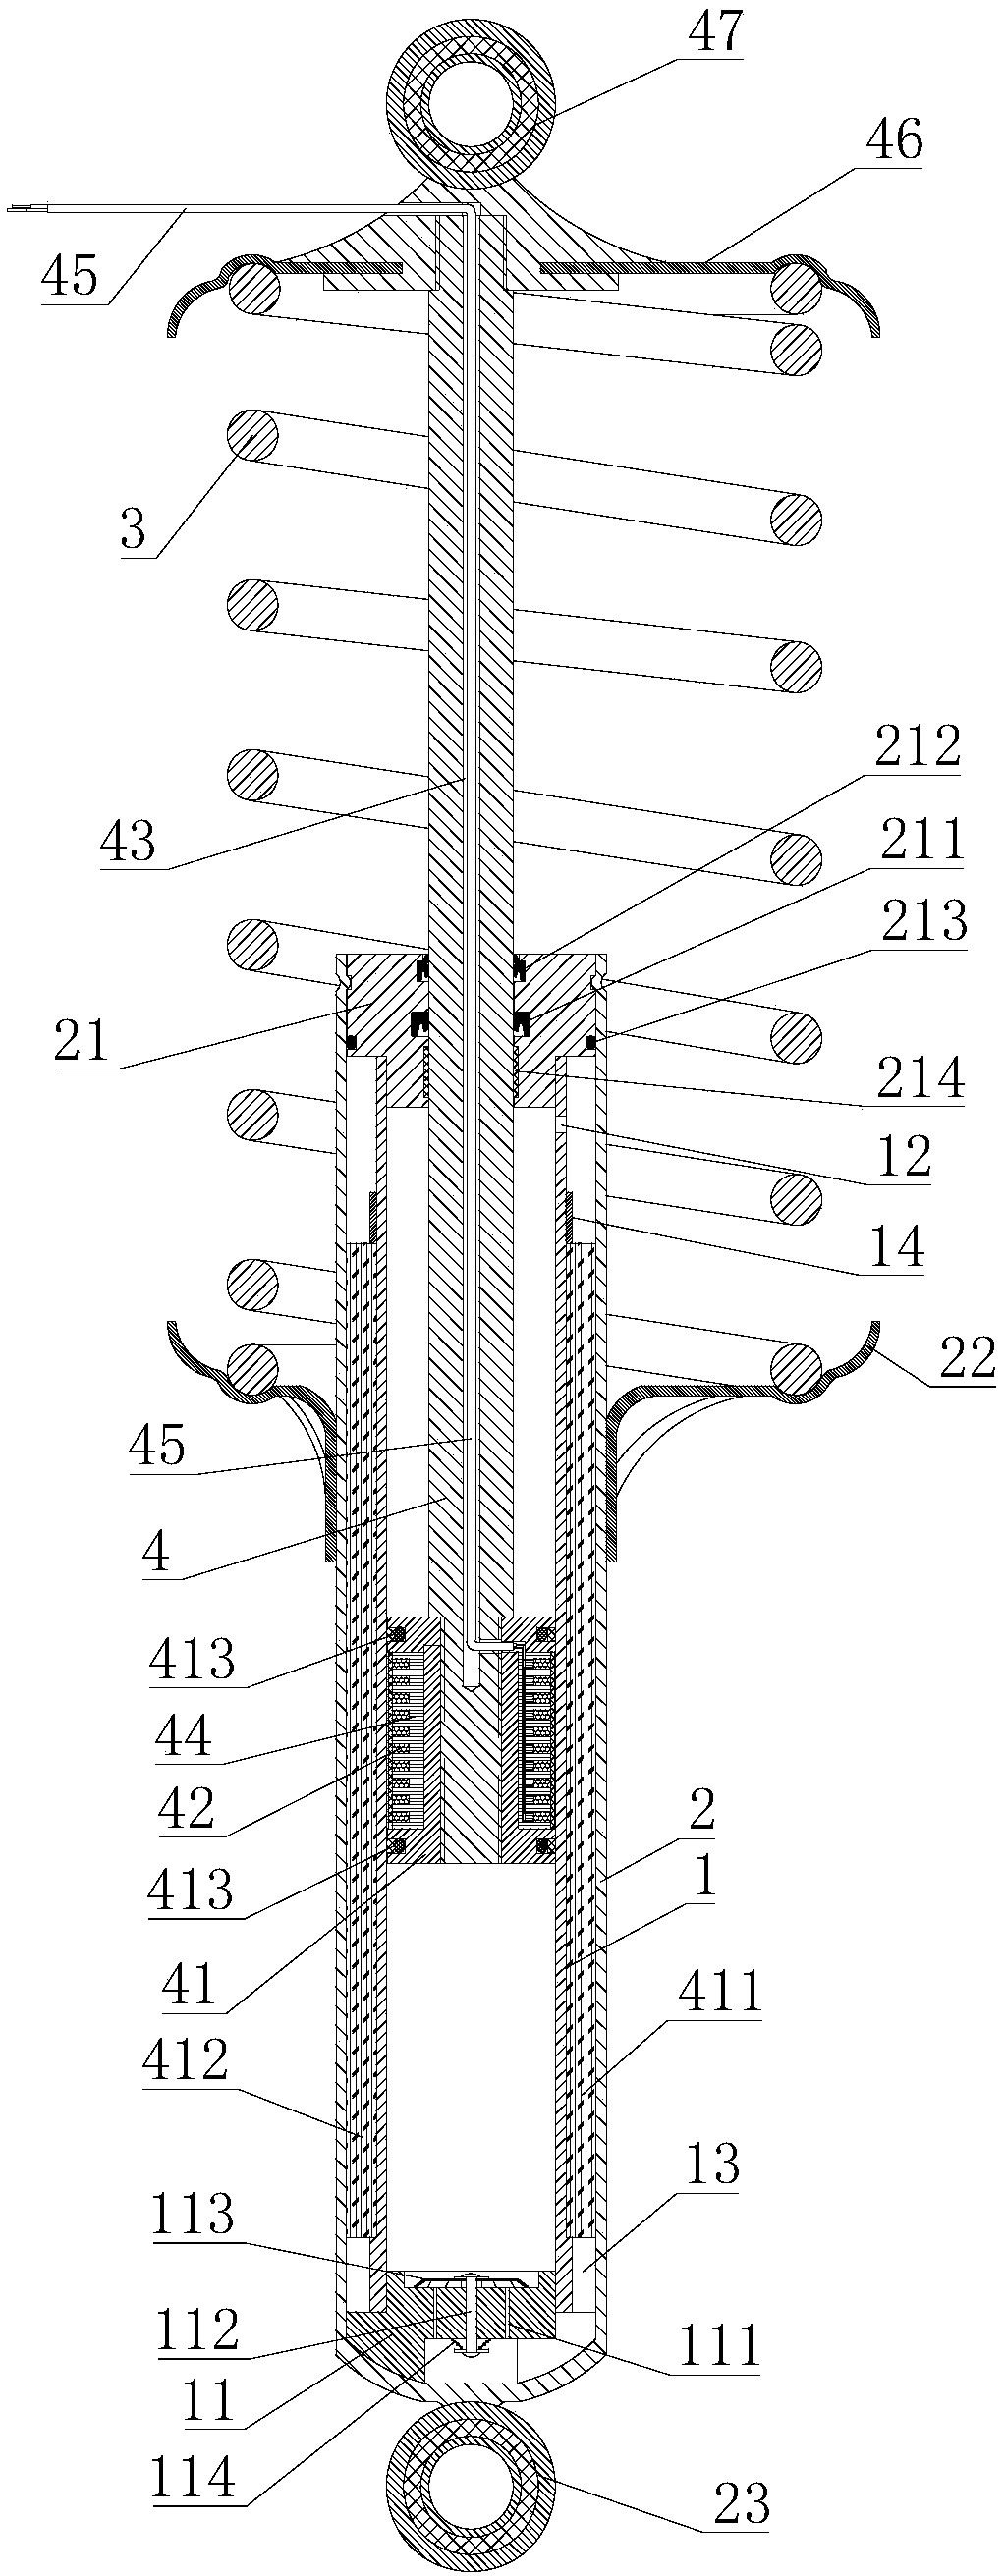 Vehicular shock absorber capable of generating electricity